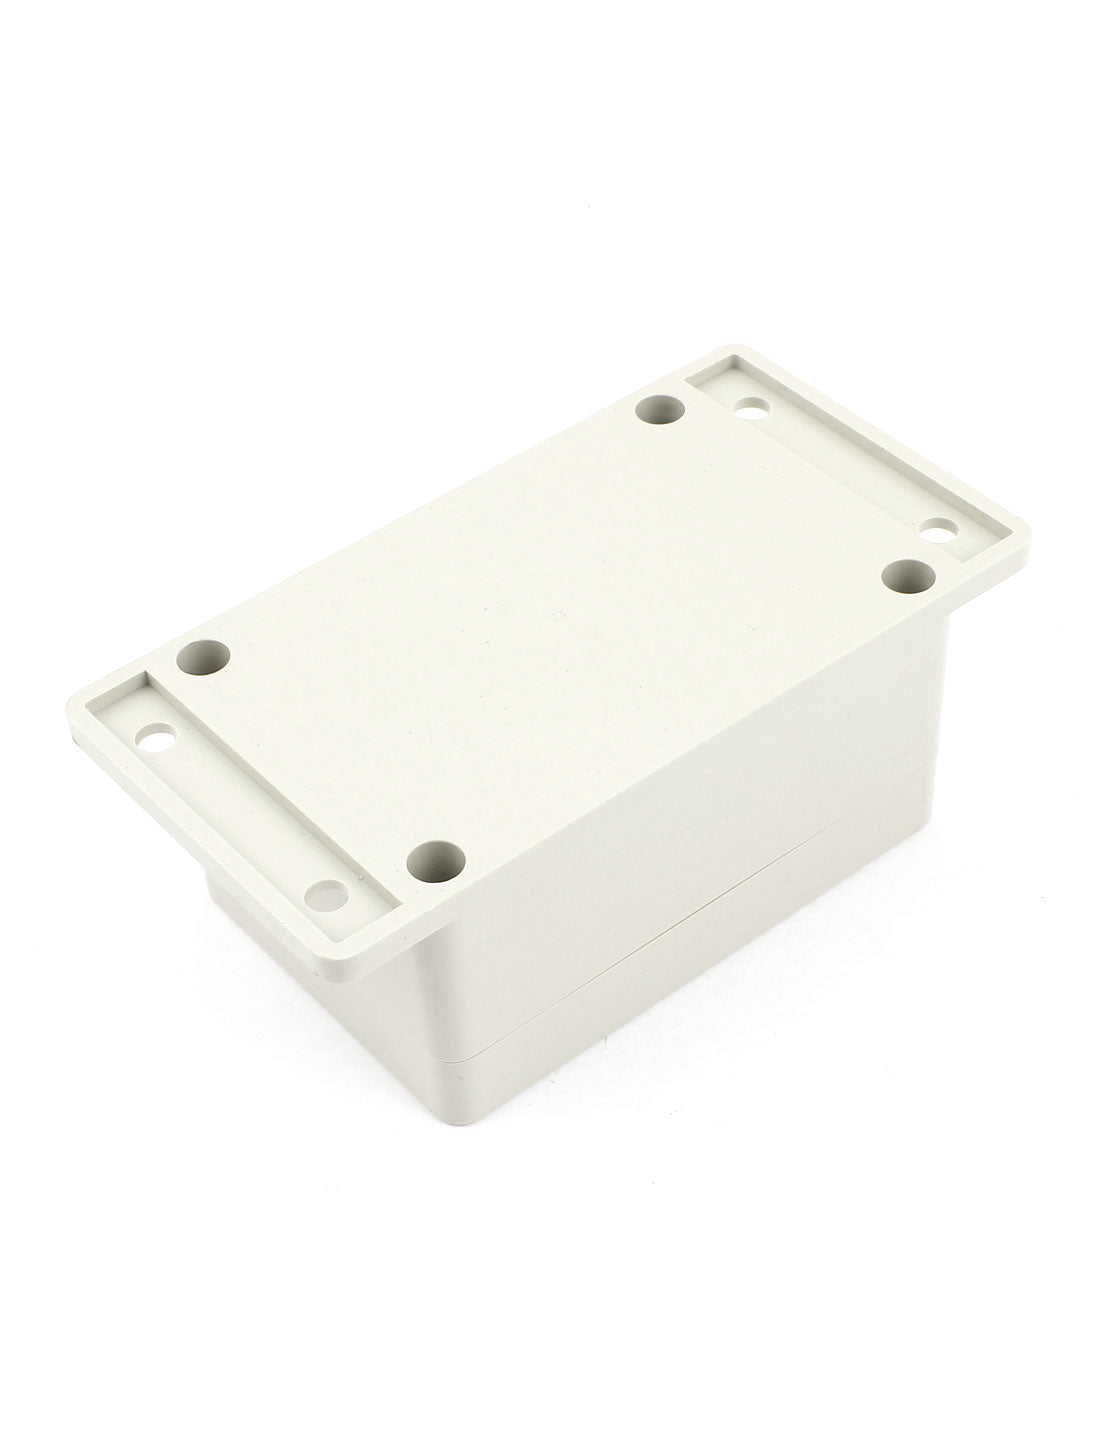 uxcell Uxcell 100mm x 68mm x 50mm Plastic Dustproof IP65 Sealed DIY Joint Electrical Junction Box